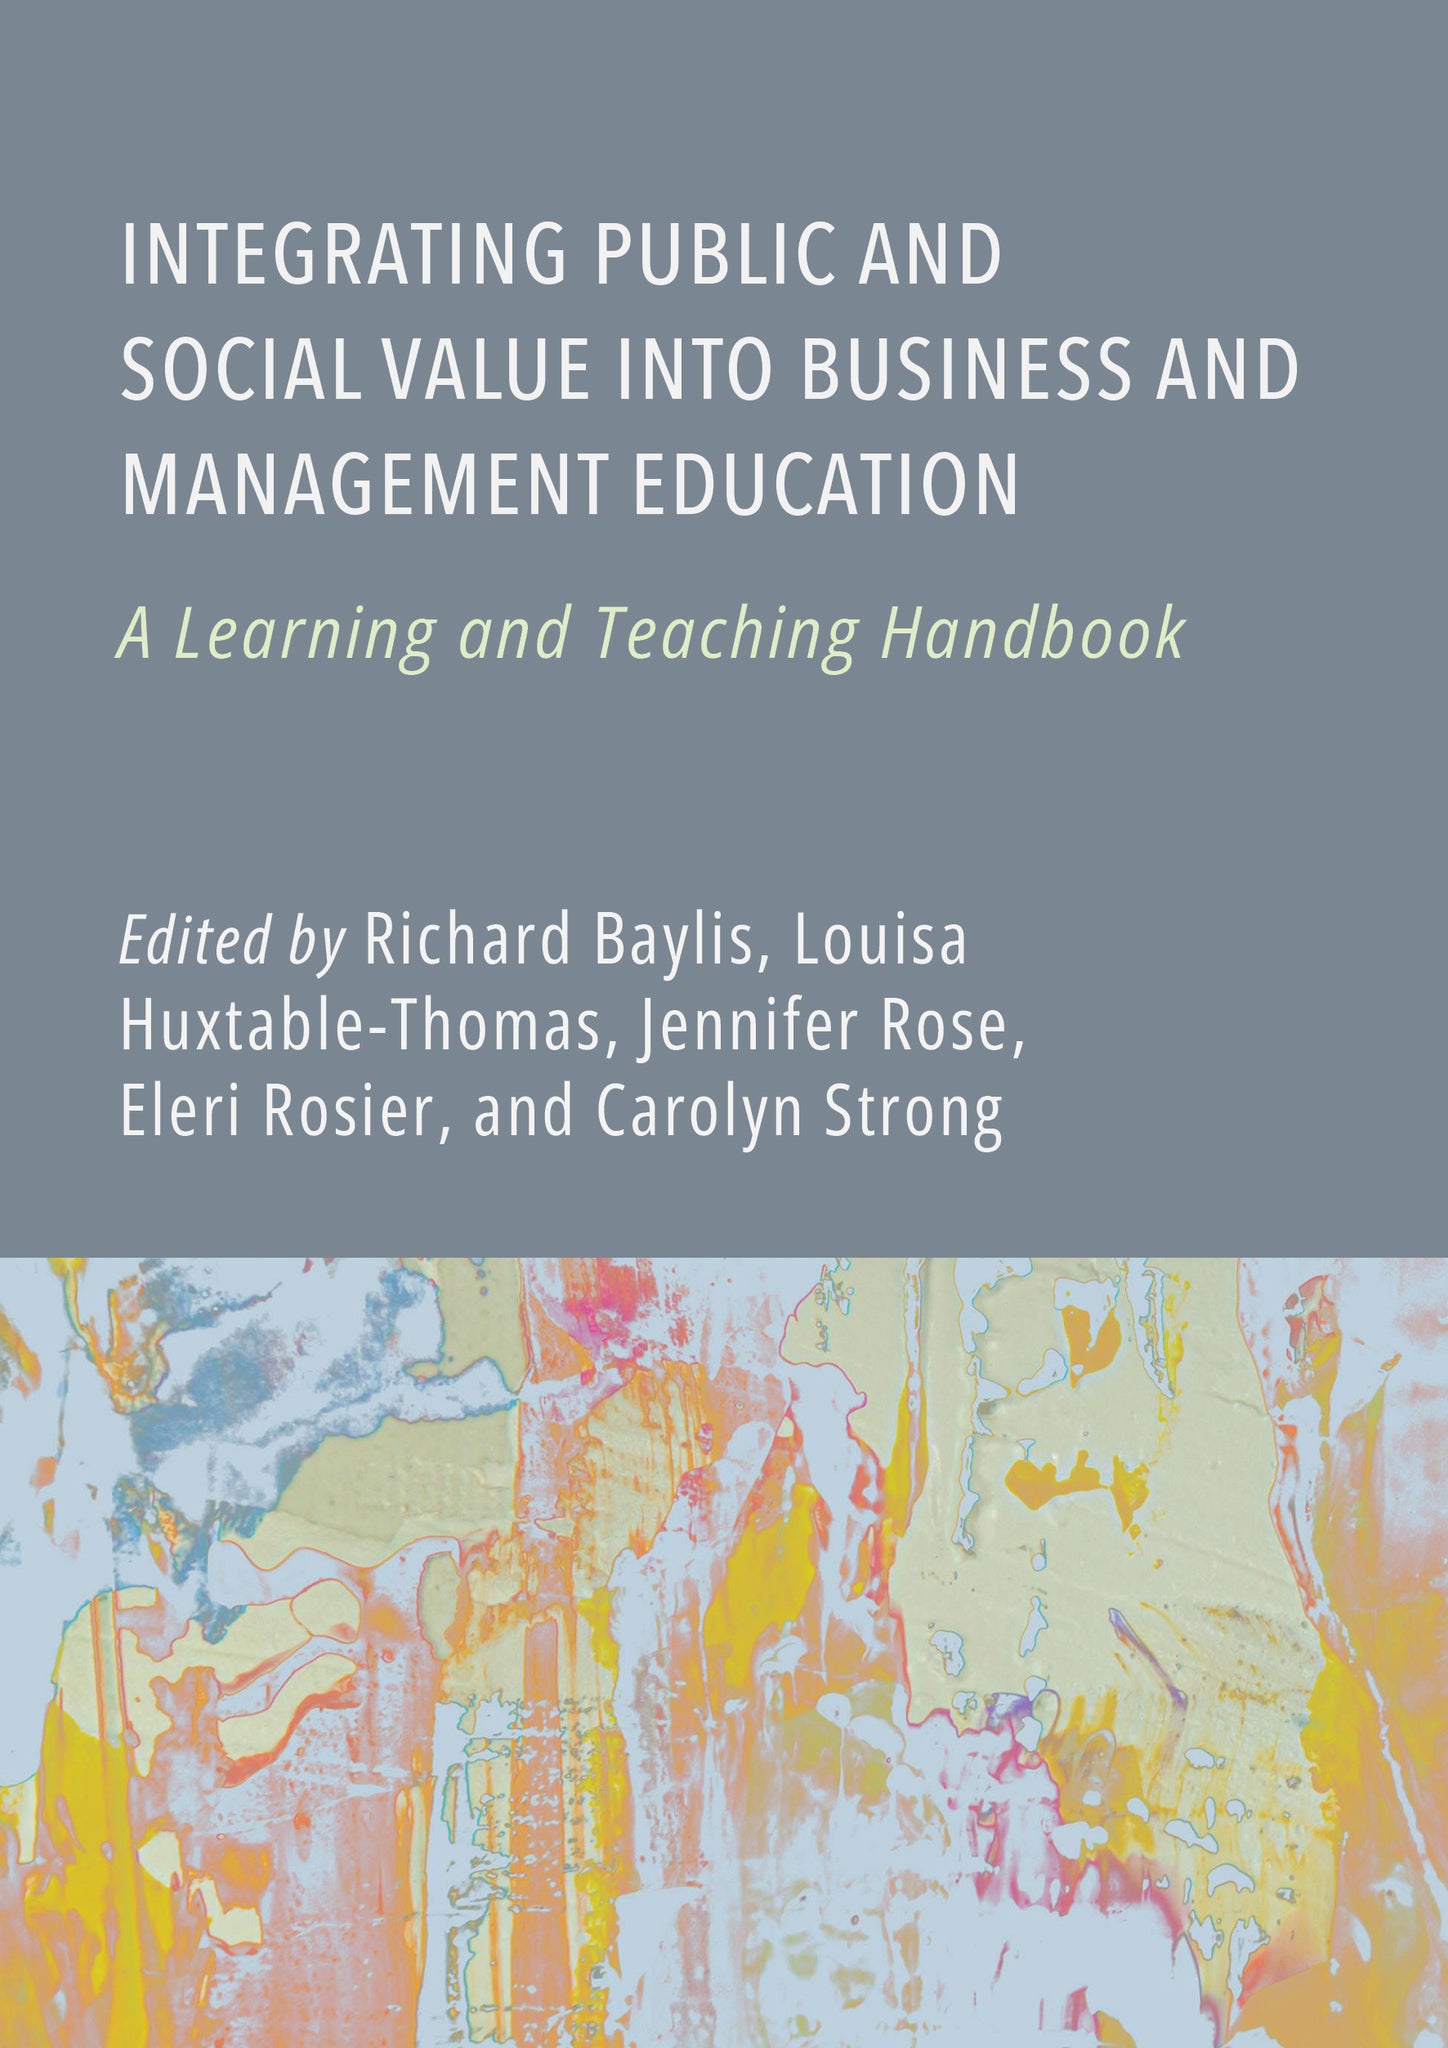 Integrating Public and Social Value into Business and Management Education: A Learning and Teaching Handbook